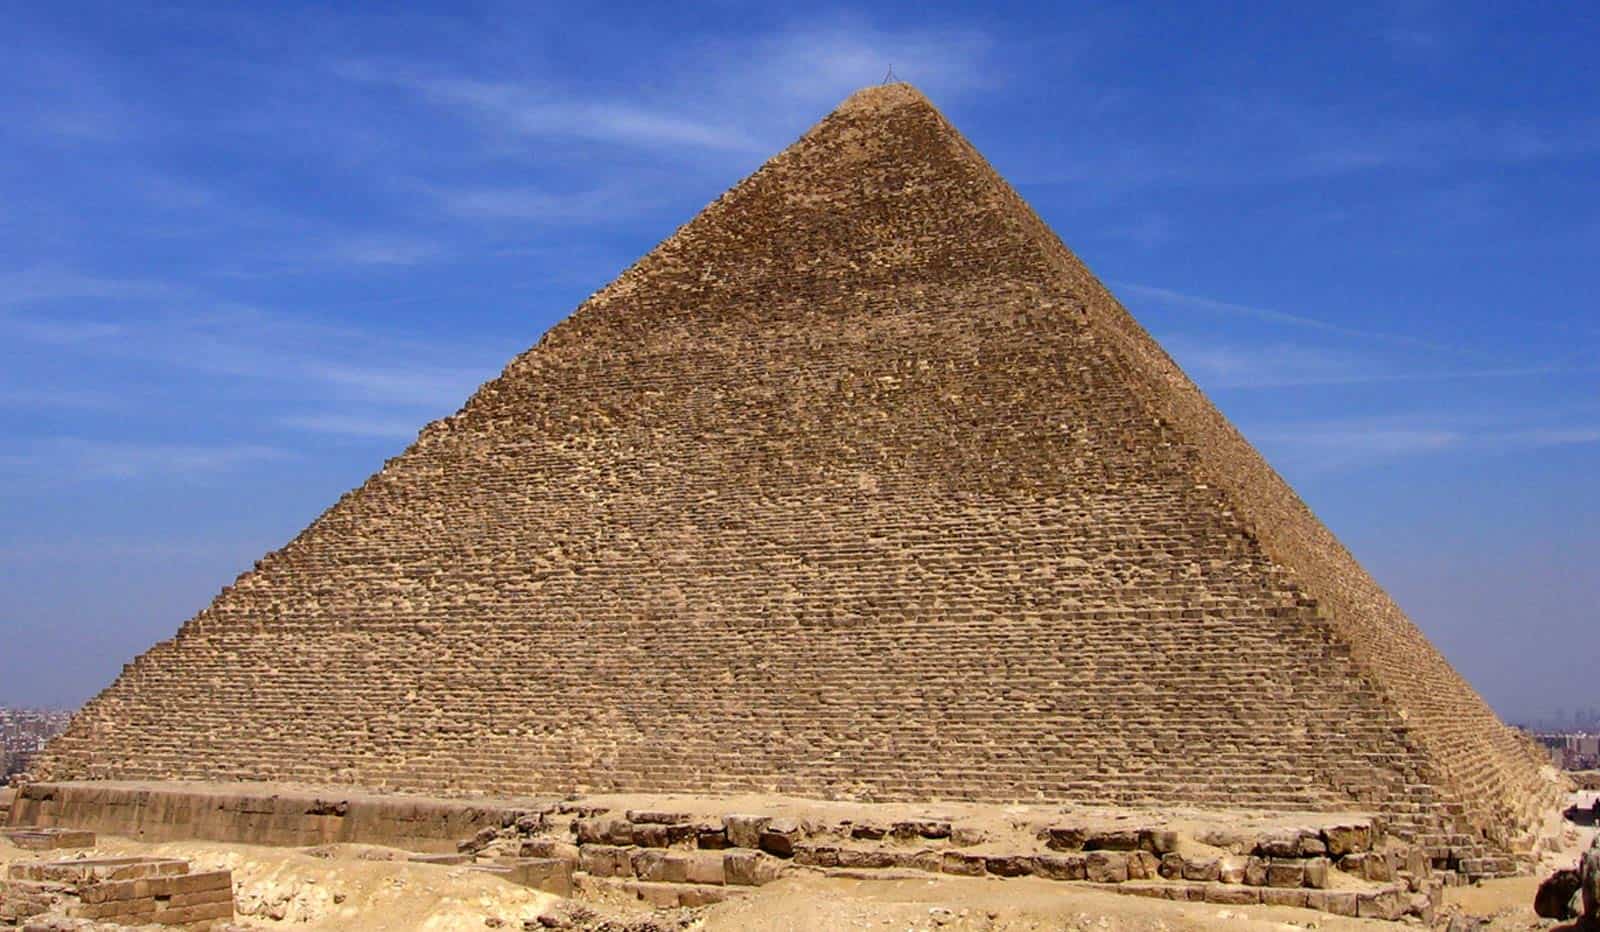 the great pyramid